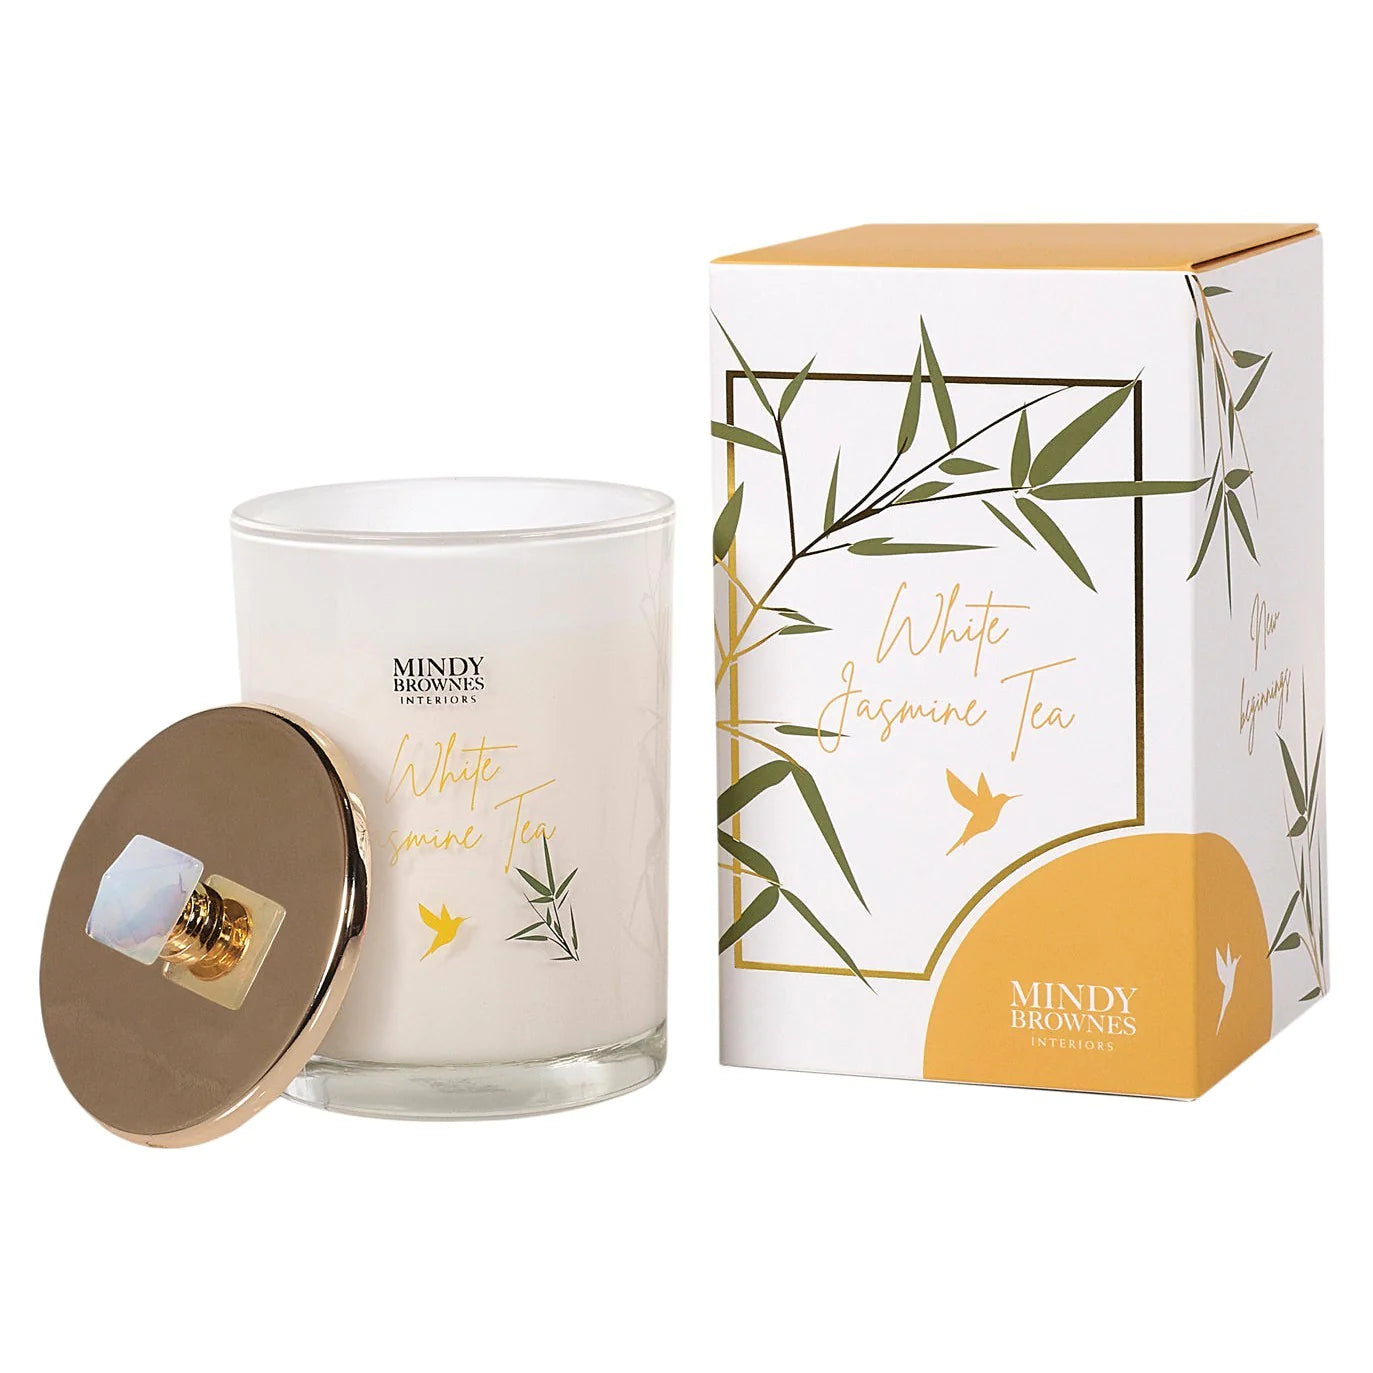 Mindy Brownes Scented Candles - White Jasmine